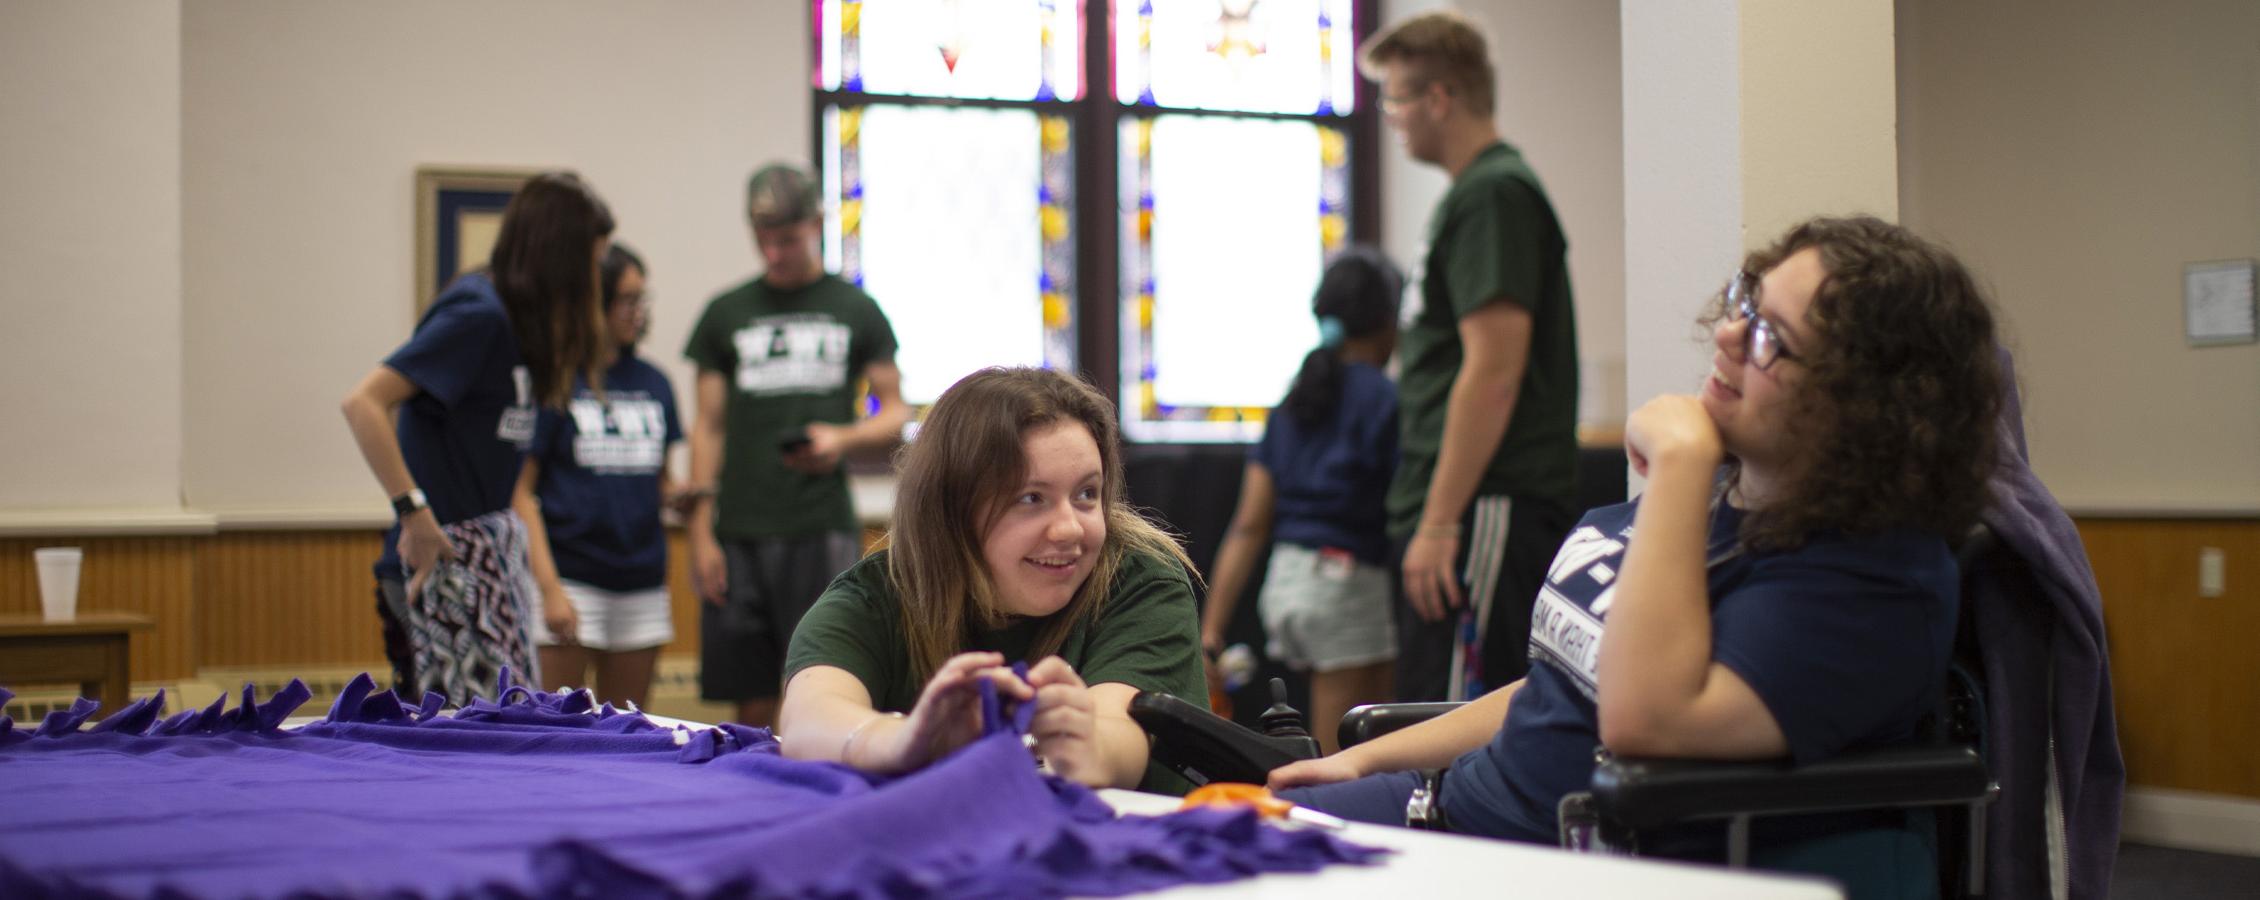 Two students make a purple blanket as they participate in community events.